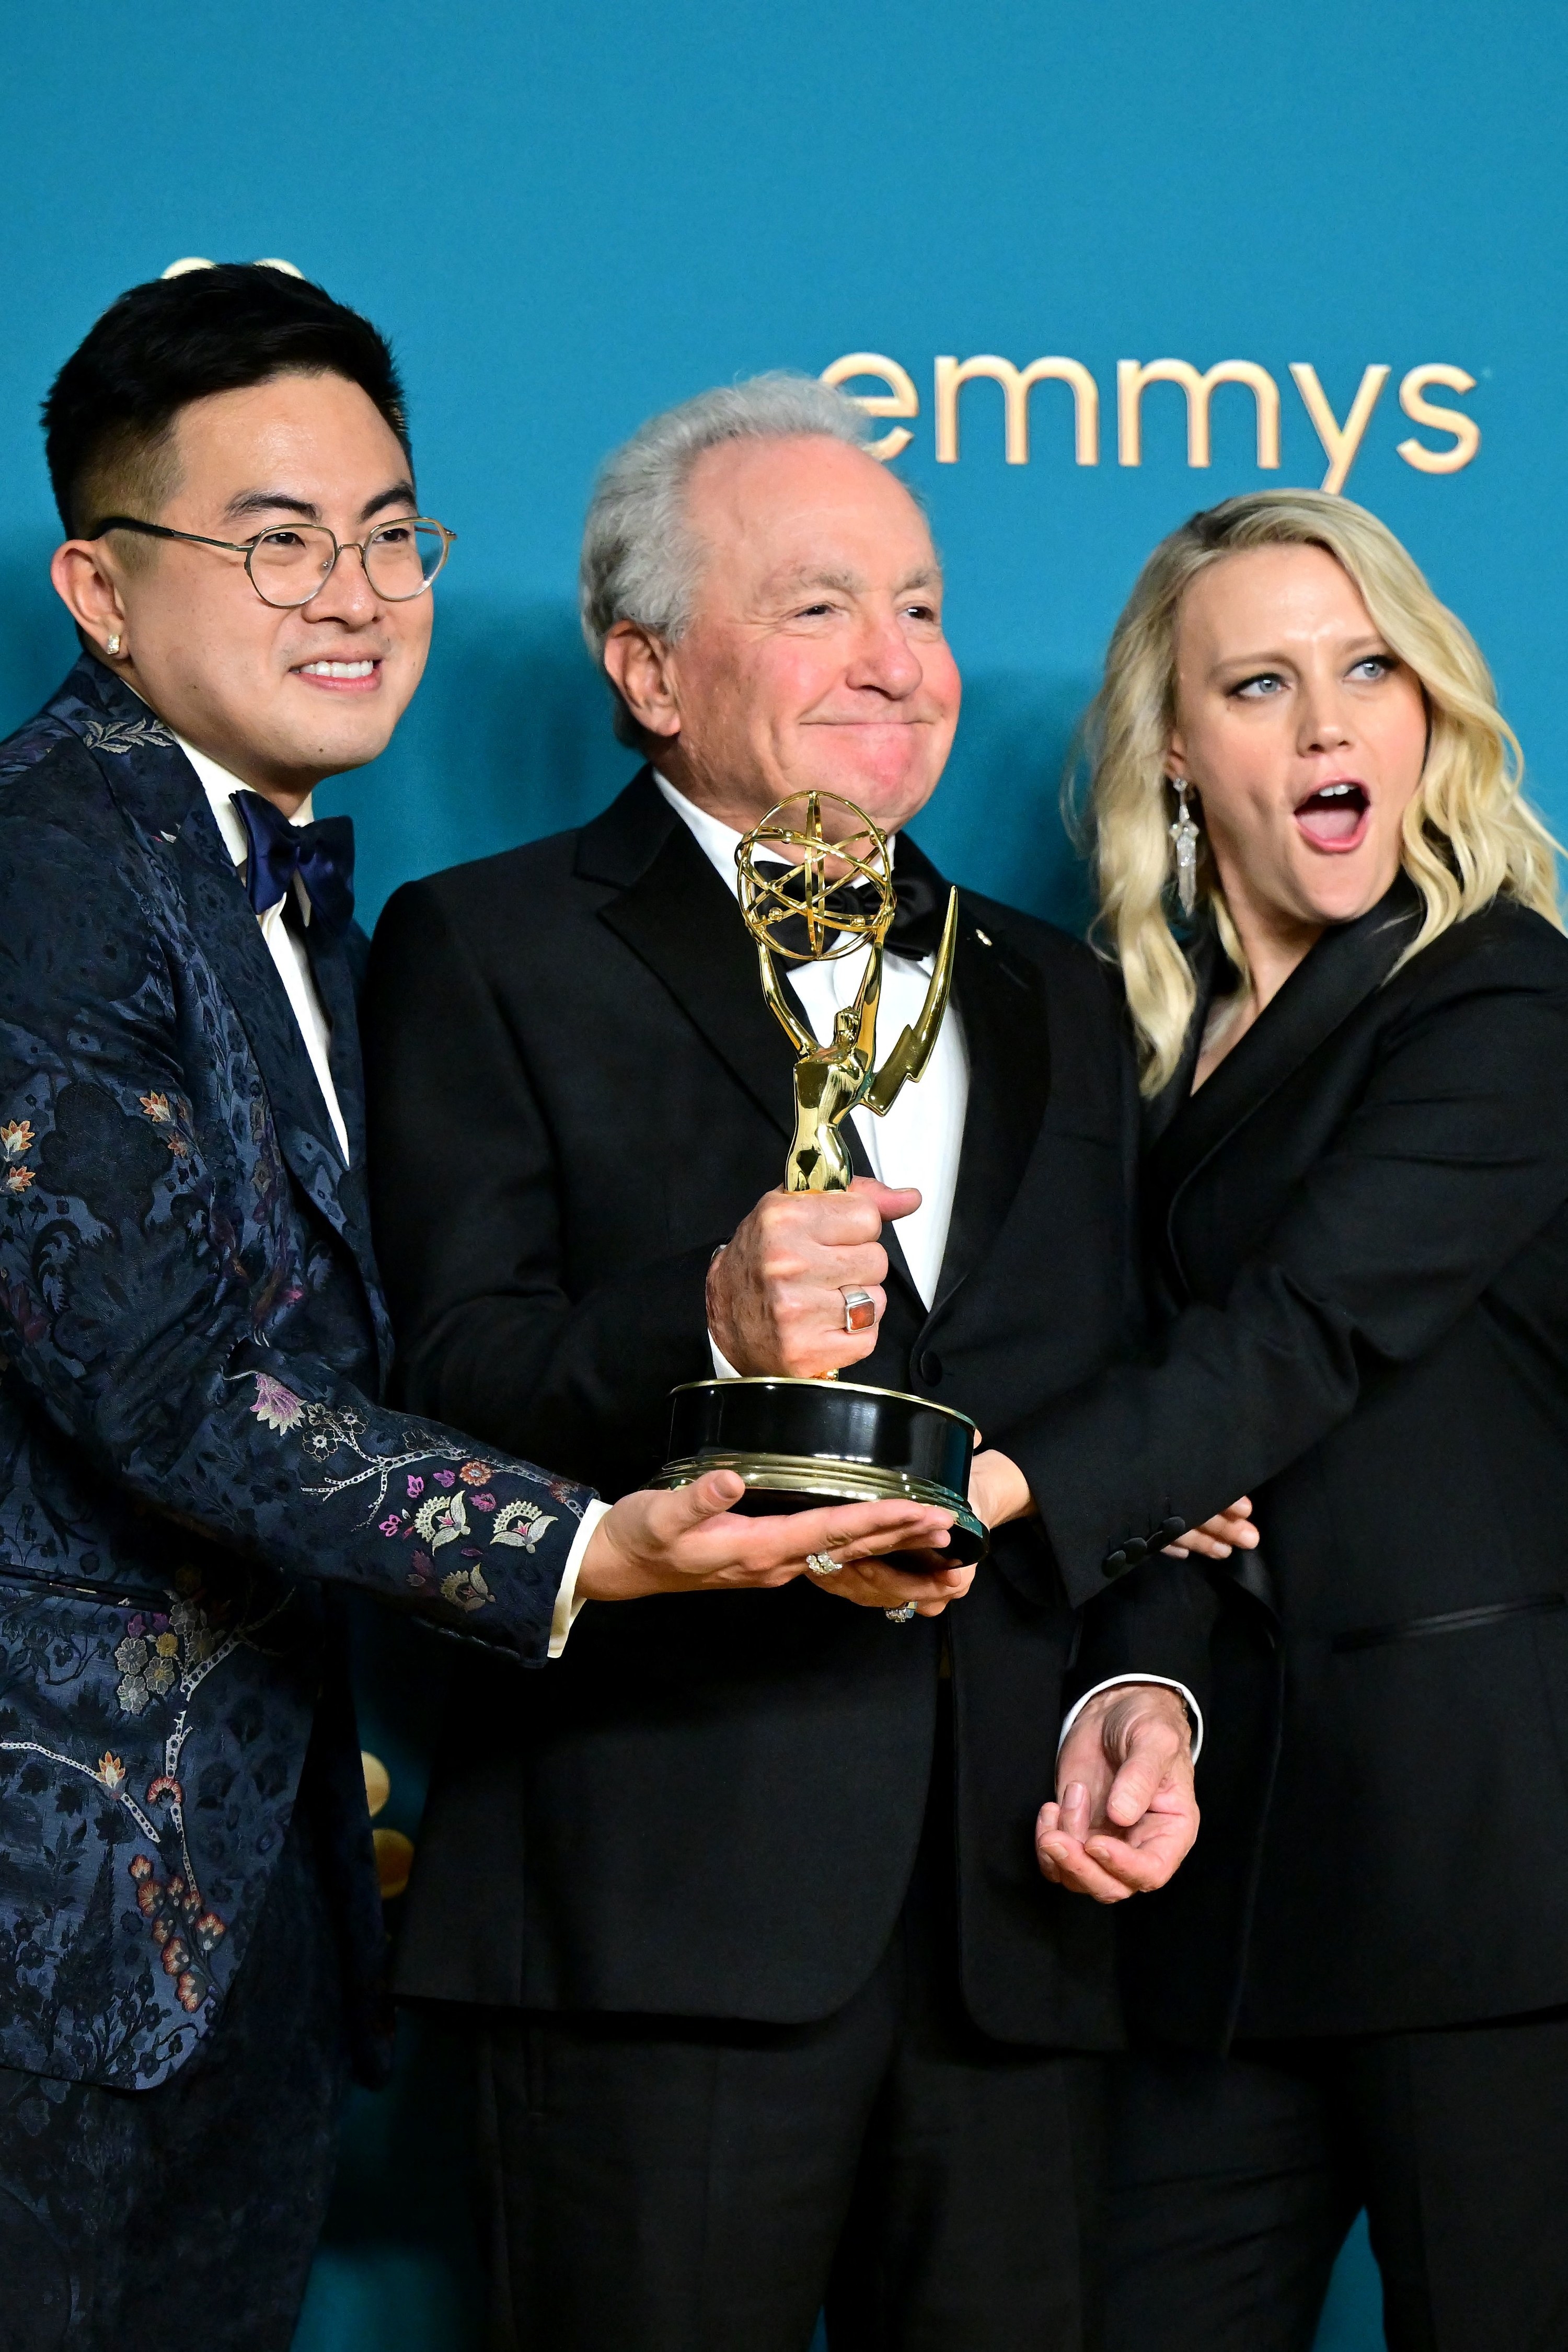 Lorne Michaels holding an Emmy and posing for a photo with two cast members